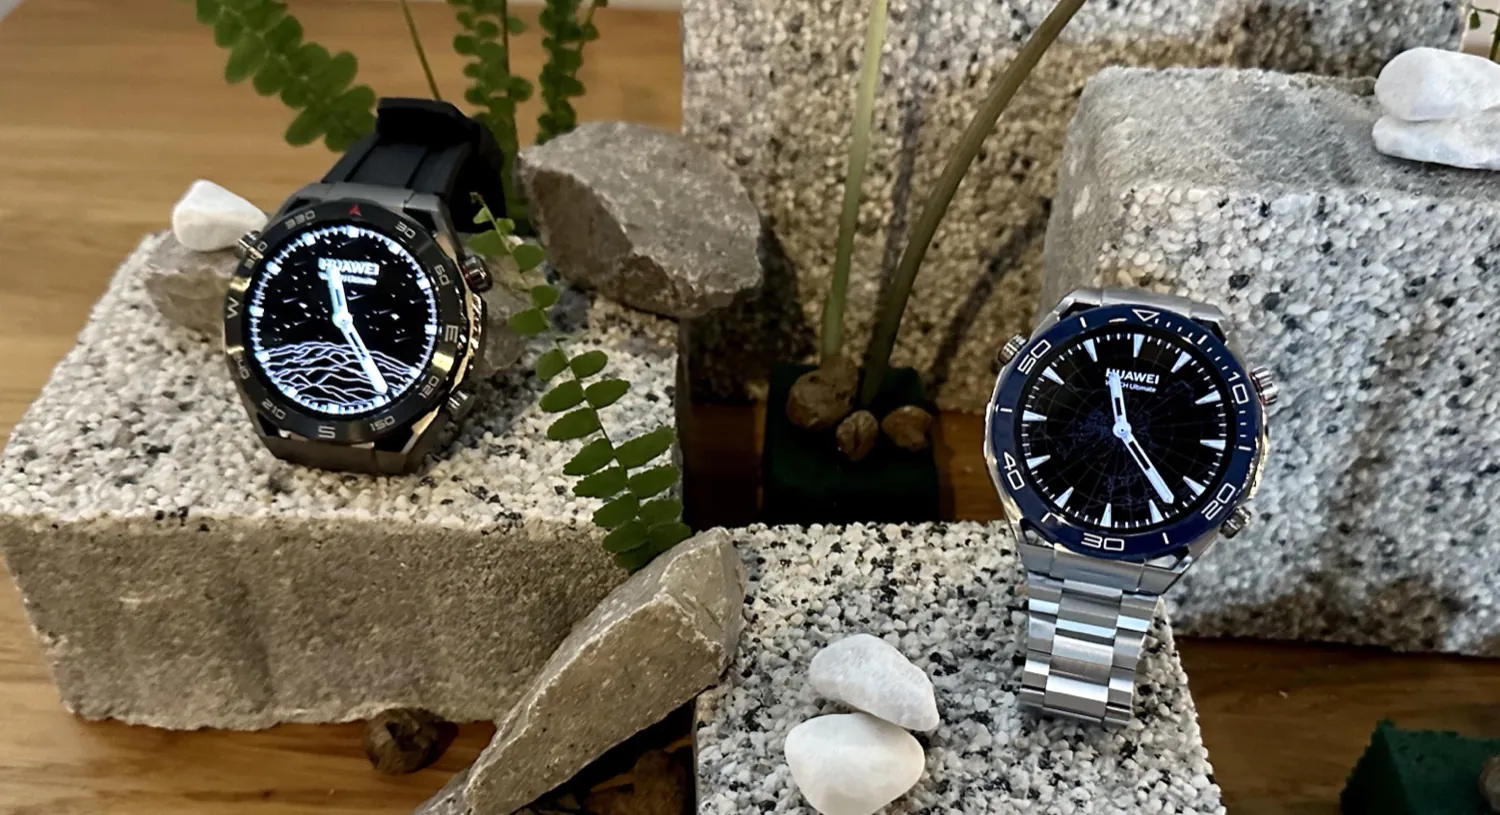 Huawei Watch Ultimate announced with 1.5 display, 100m submersion rating -   news